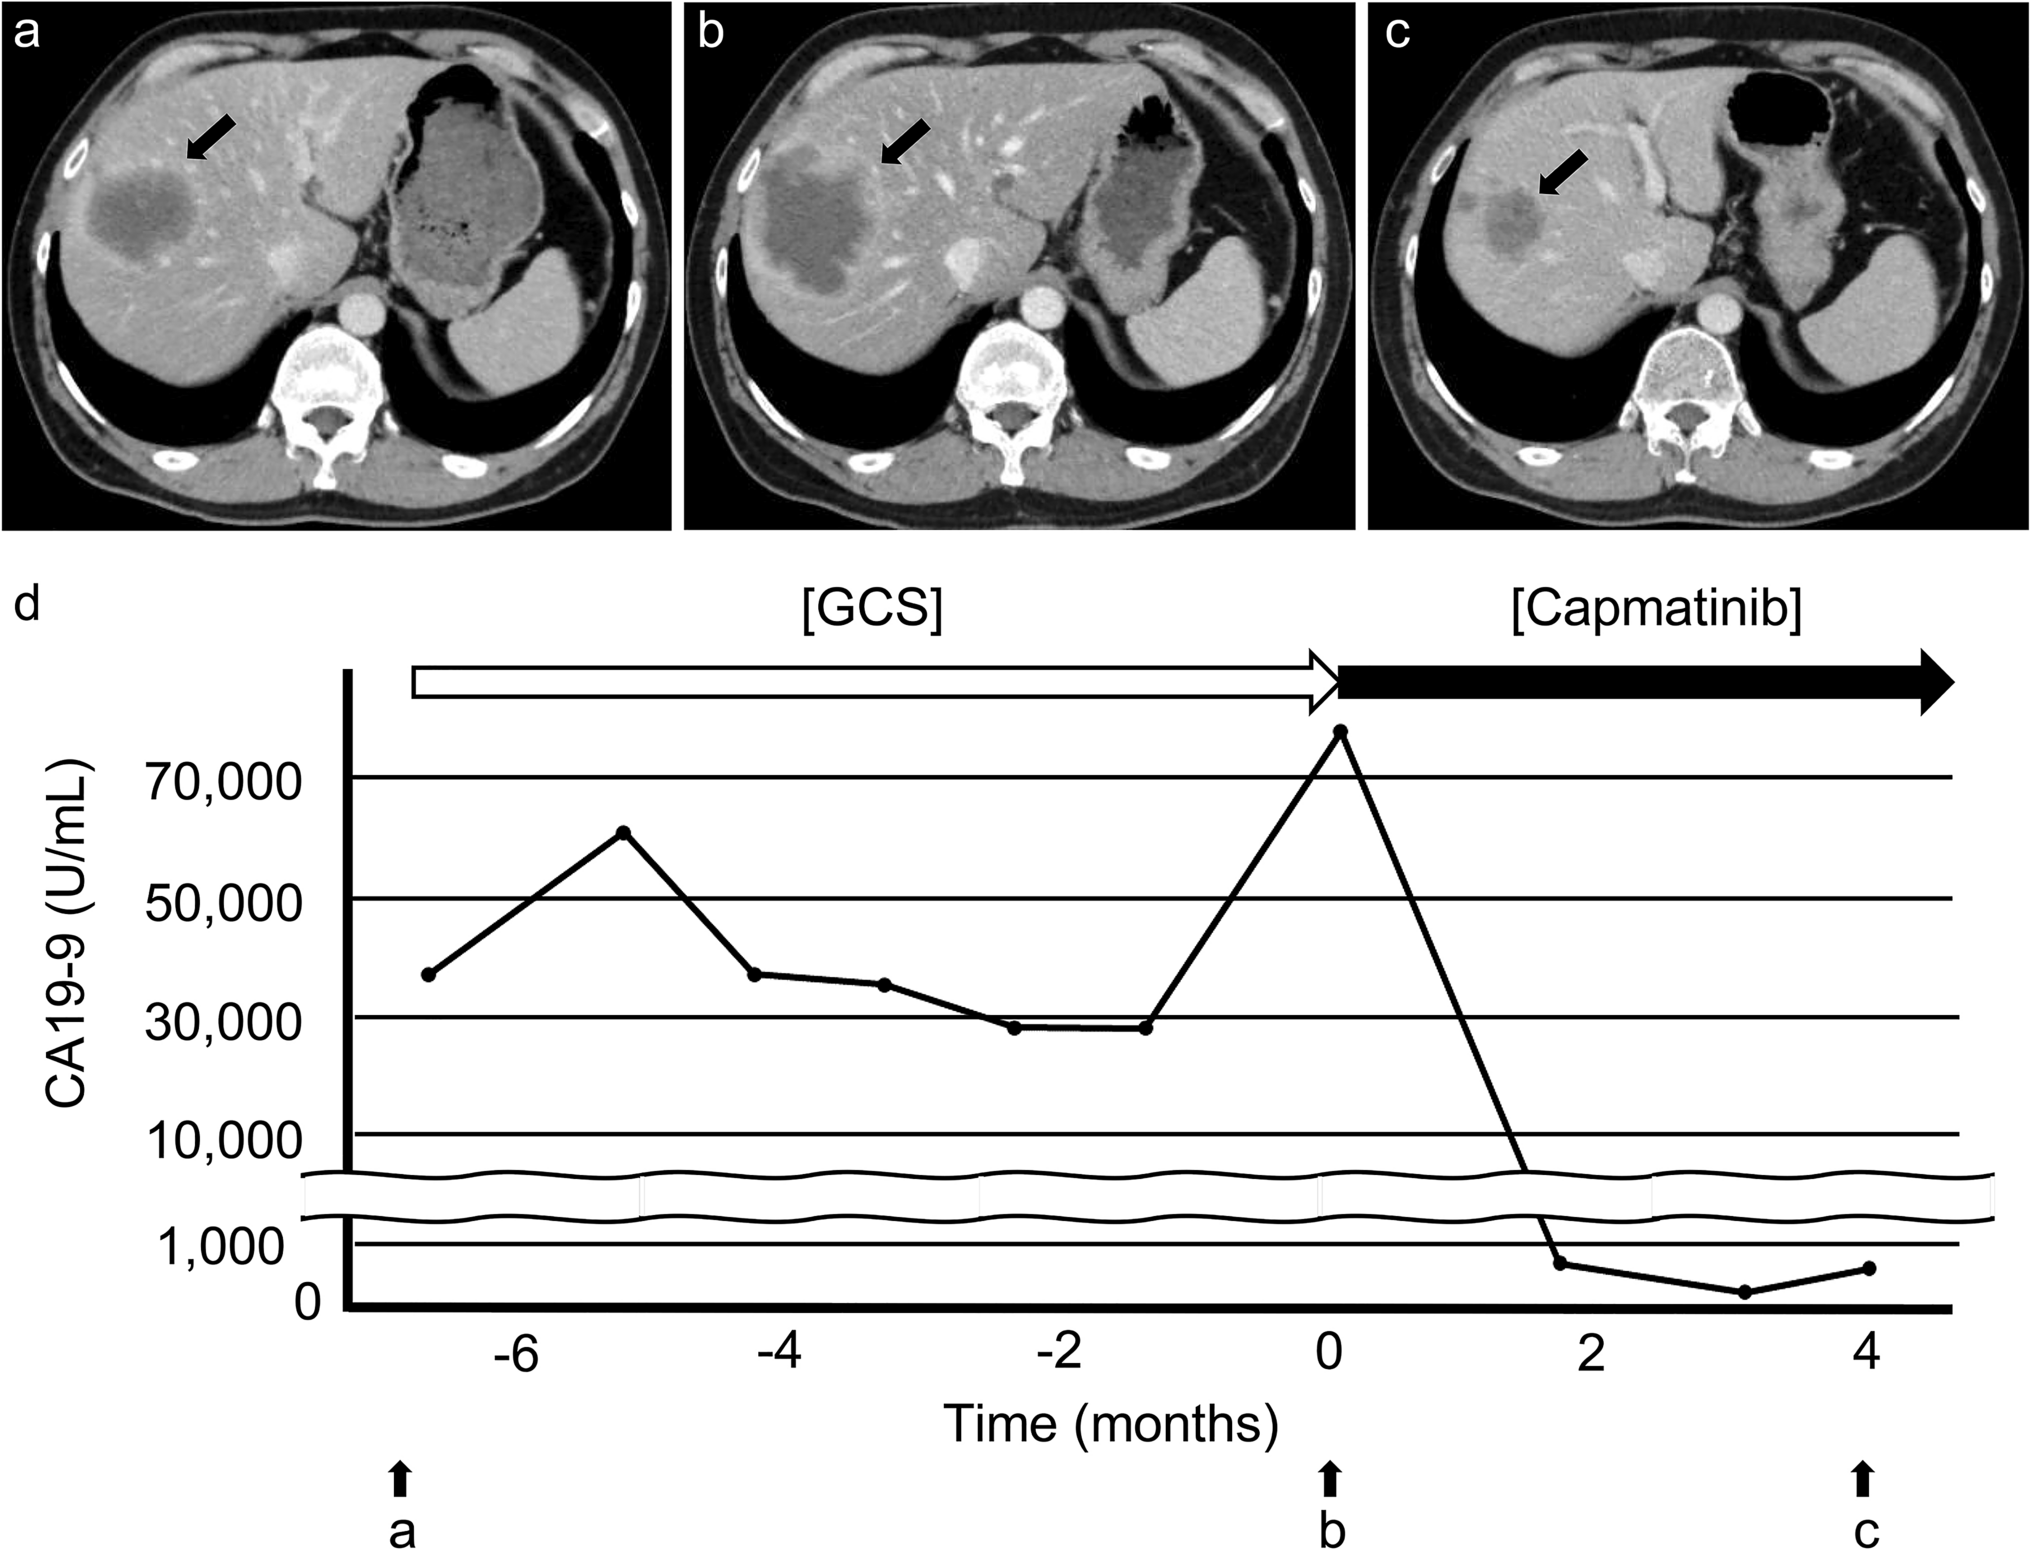 Remarkable response to capmatinib in a patient with intrahepatic cholangiocarcinoma harboring TFG-MET fusion